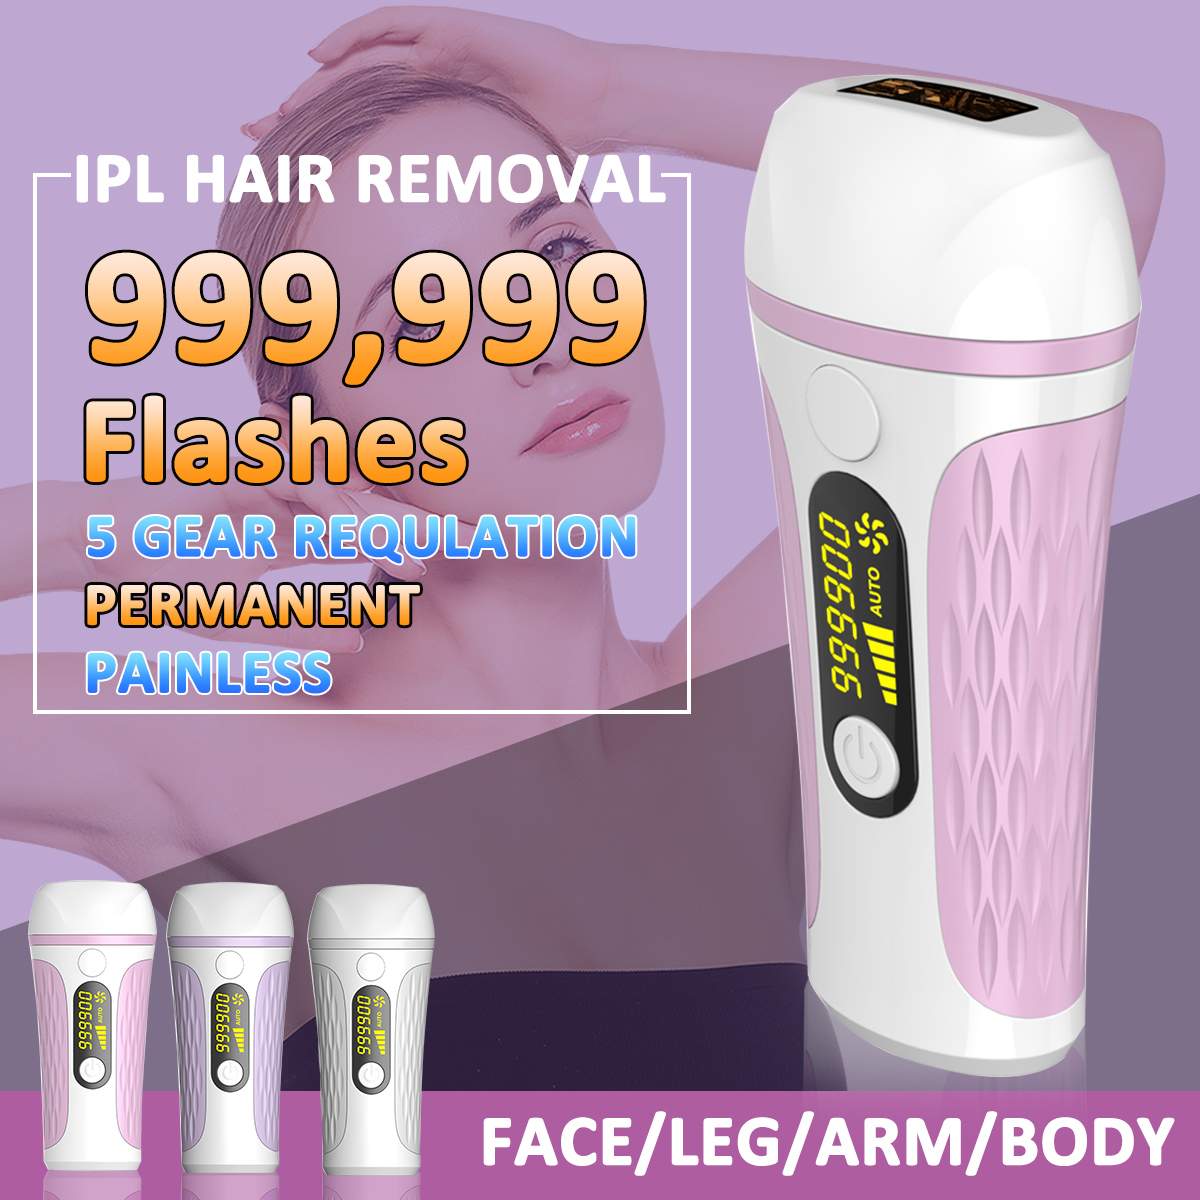 5 Level 999999 Flash 3 in 1 IPL female Hair Removal Permanent Laser Epilator Permanent Home Electric Painless Hair Removal Devic